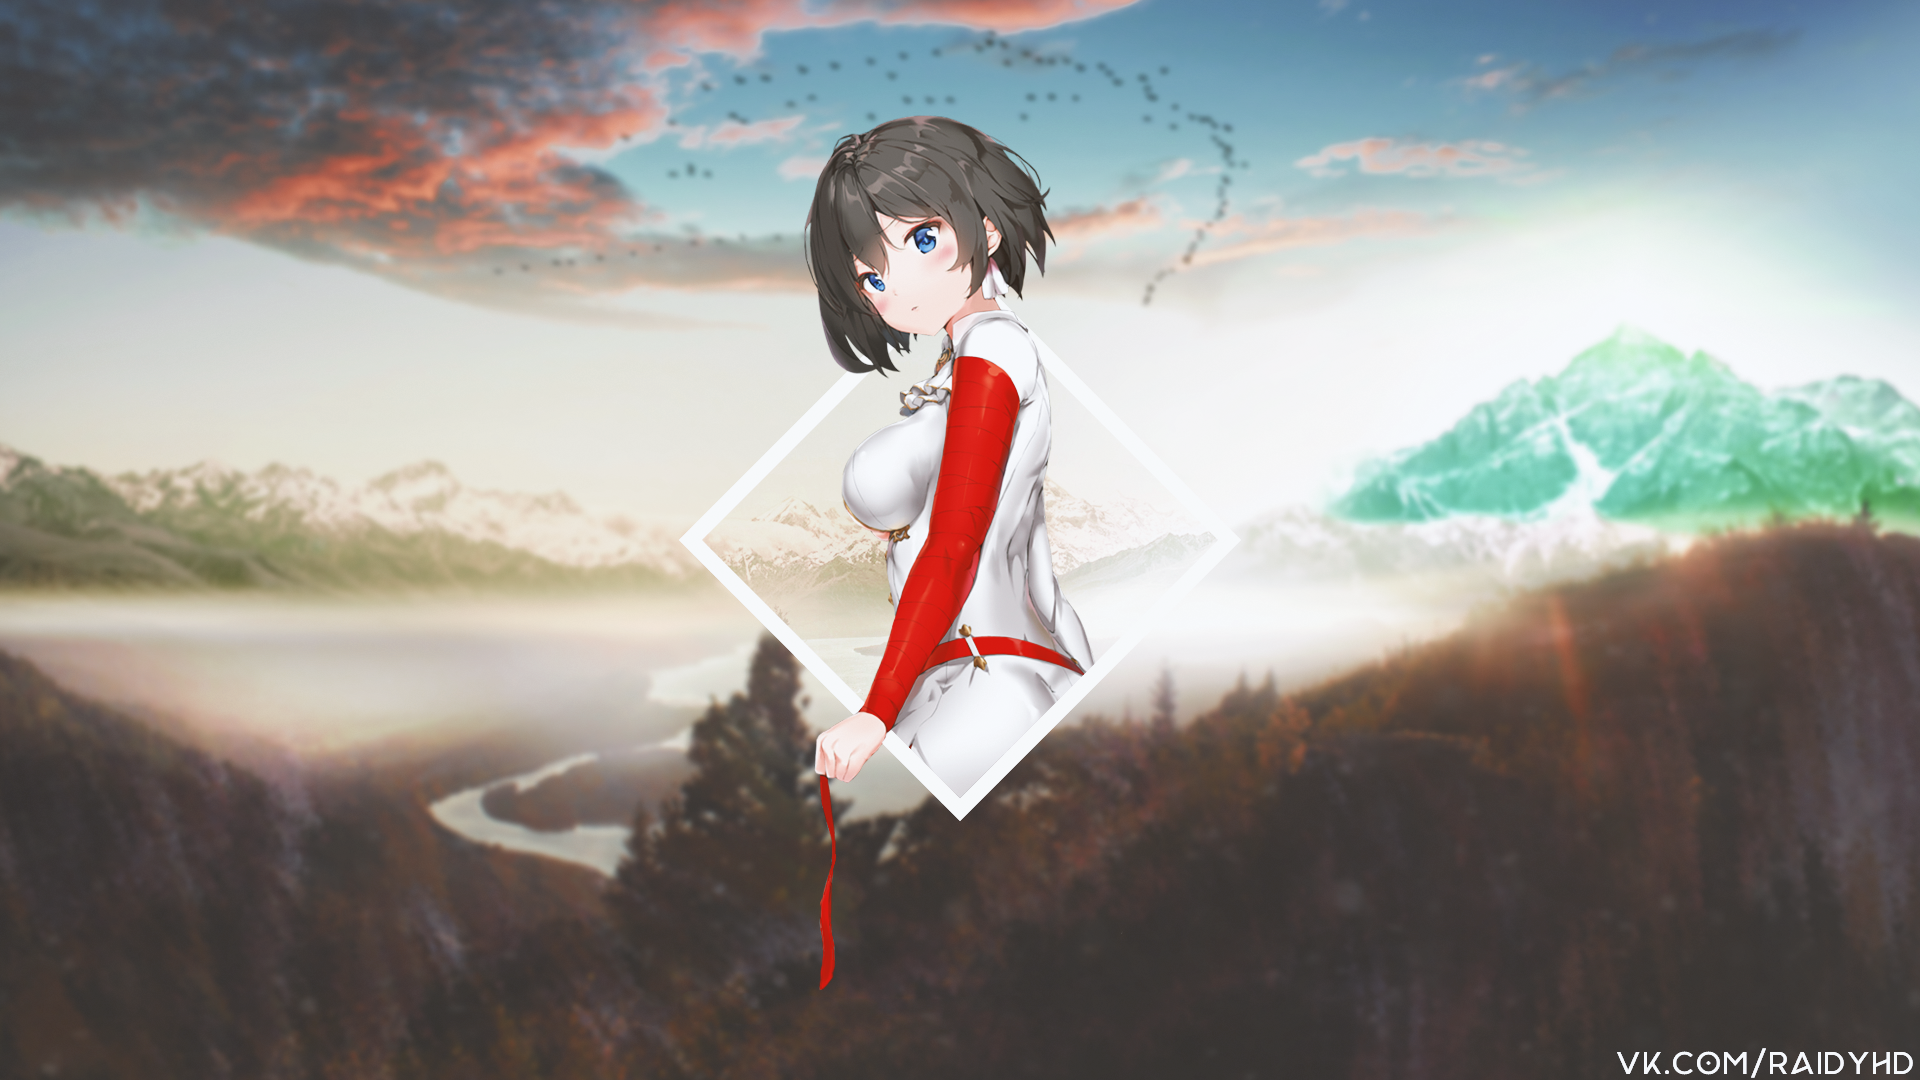 Anime 1920x1080 Matrizen Design anime anime girls picture-in-picture watermarked